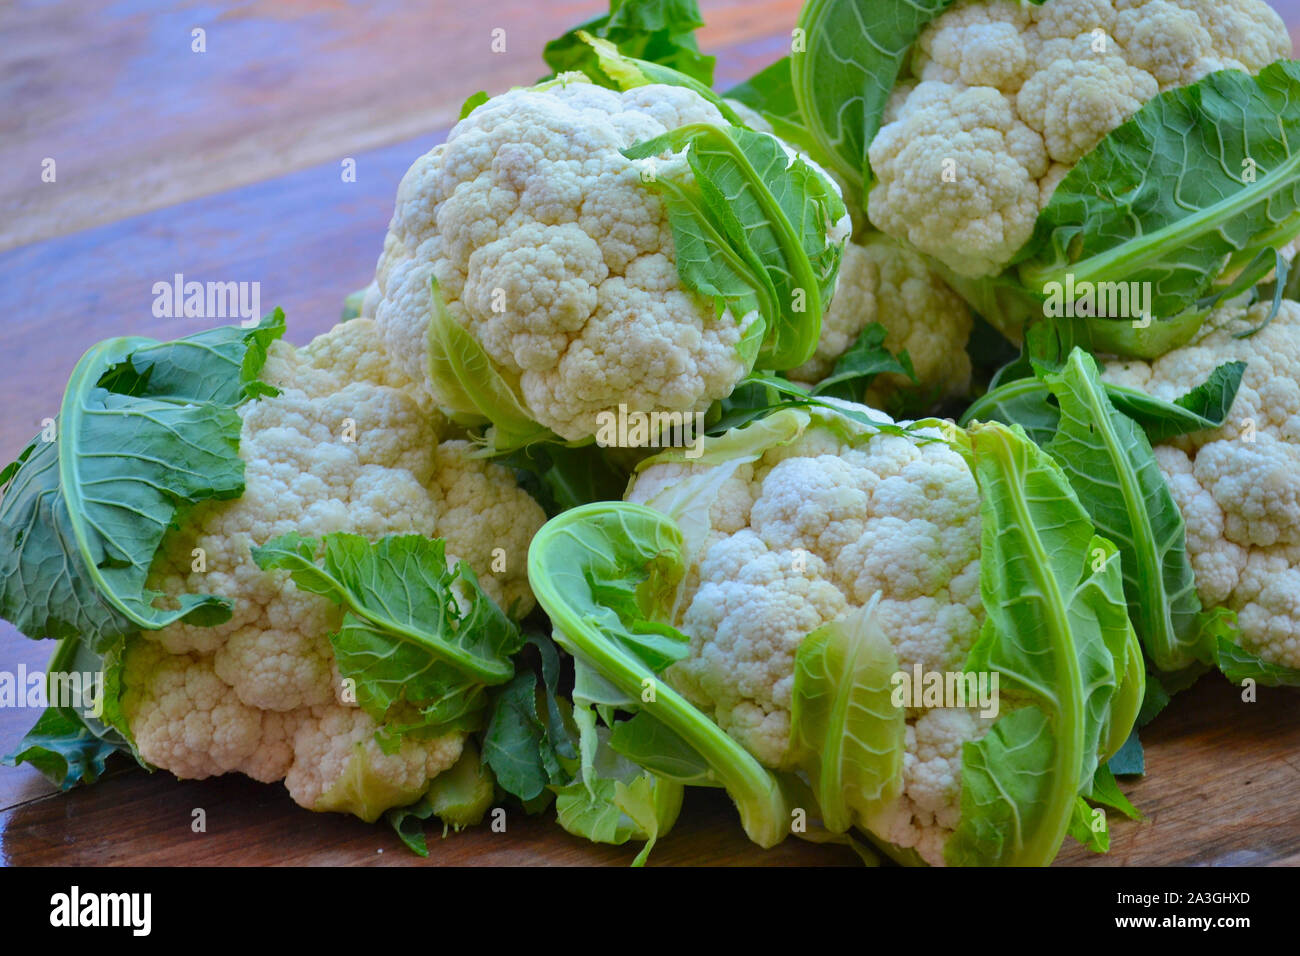 Cauliflower for pickling on a rustic wooden table,  Brassica oleracea  botrytis Stock Photo